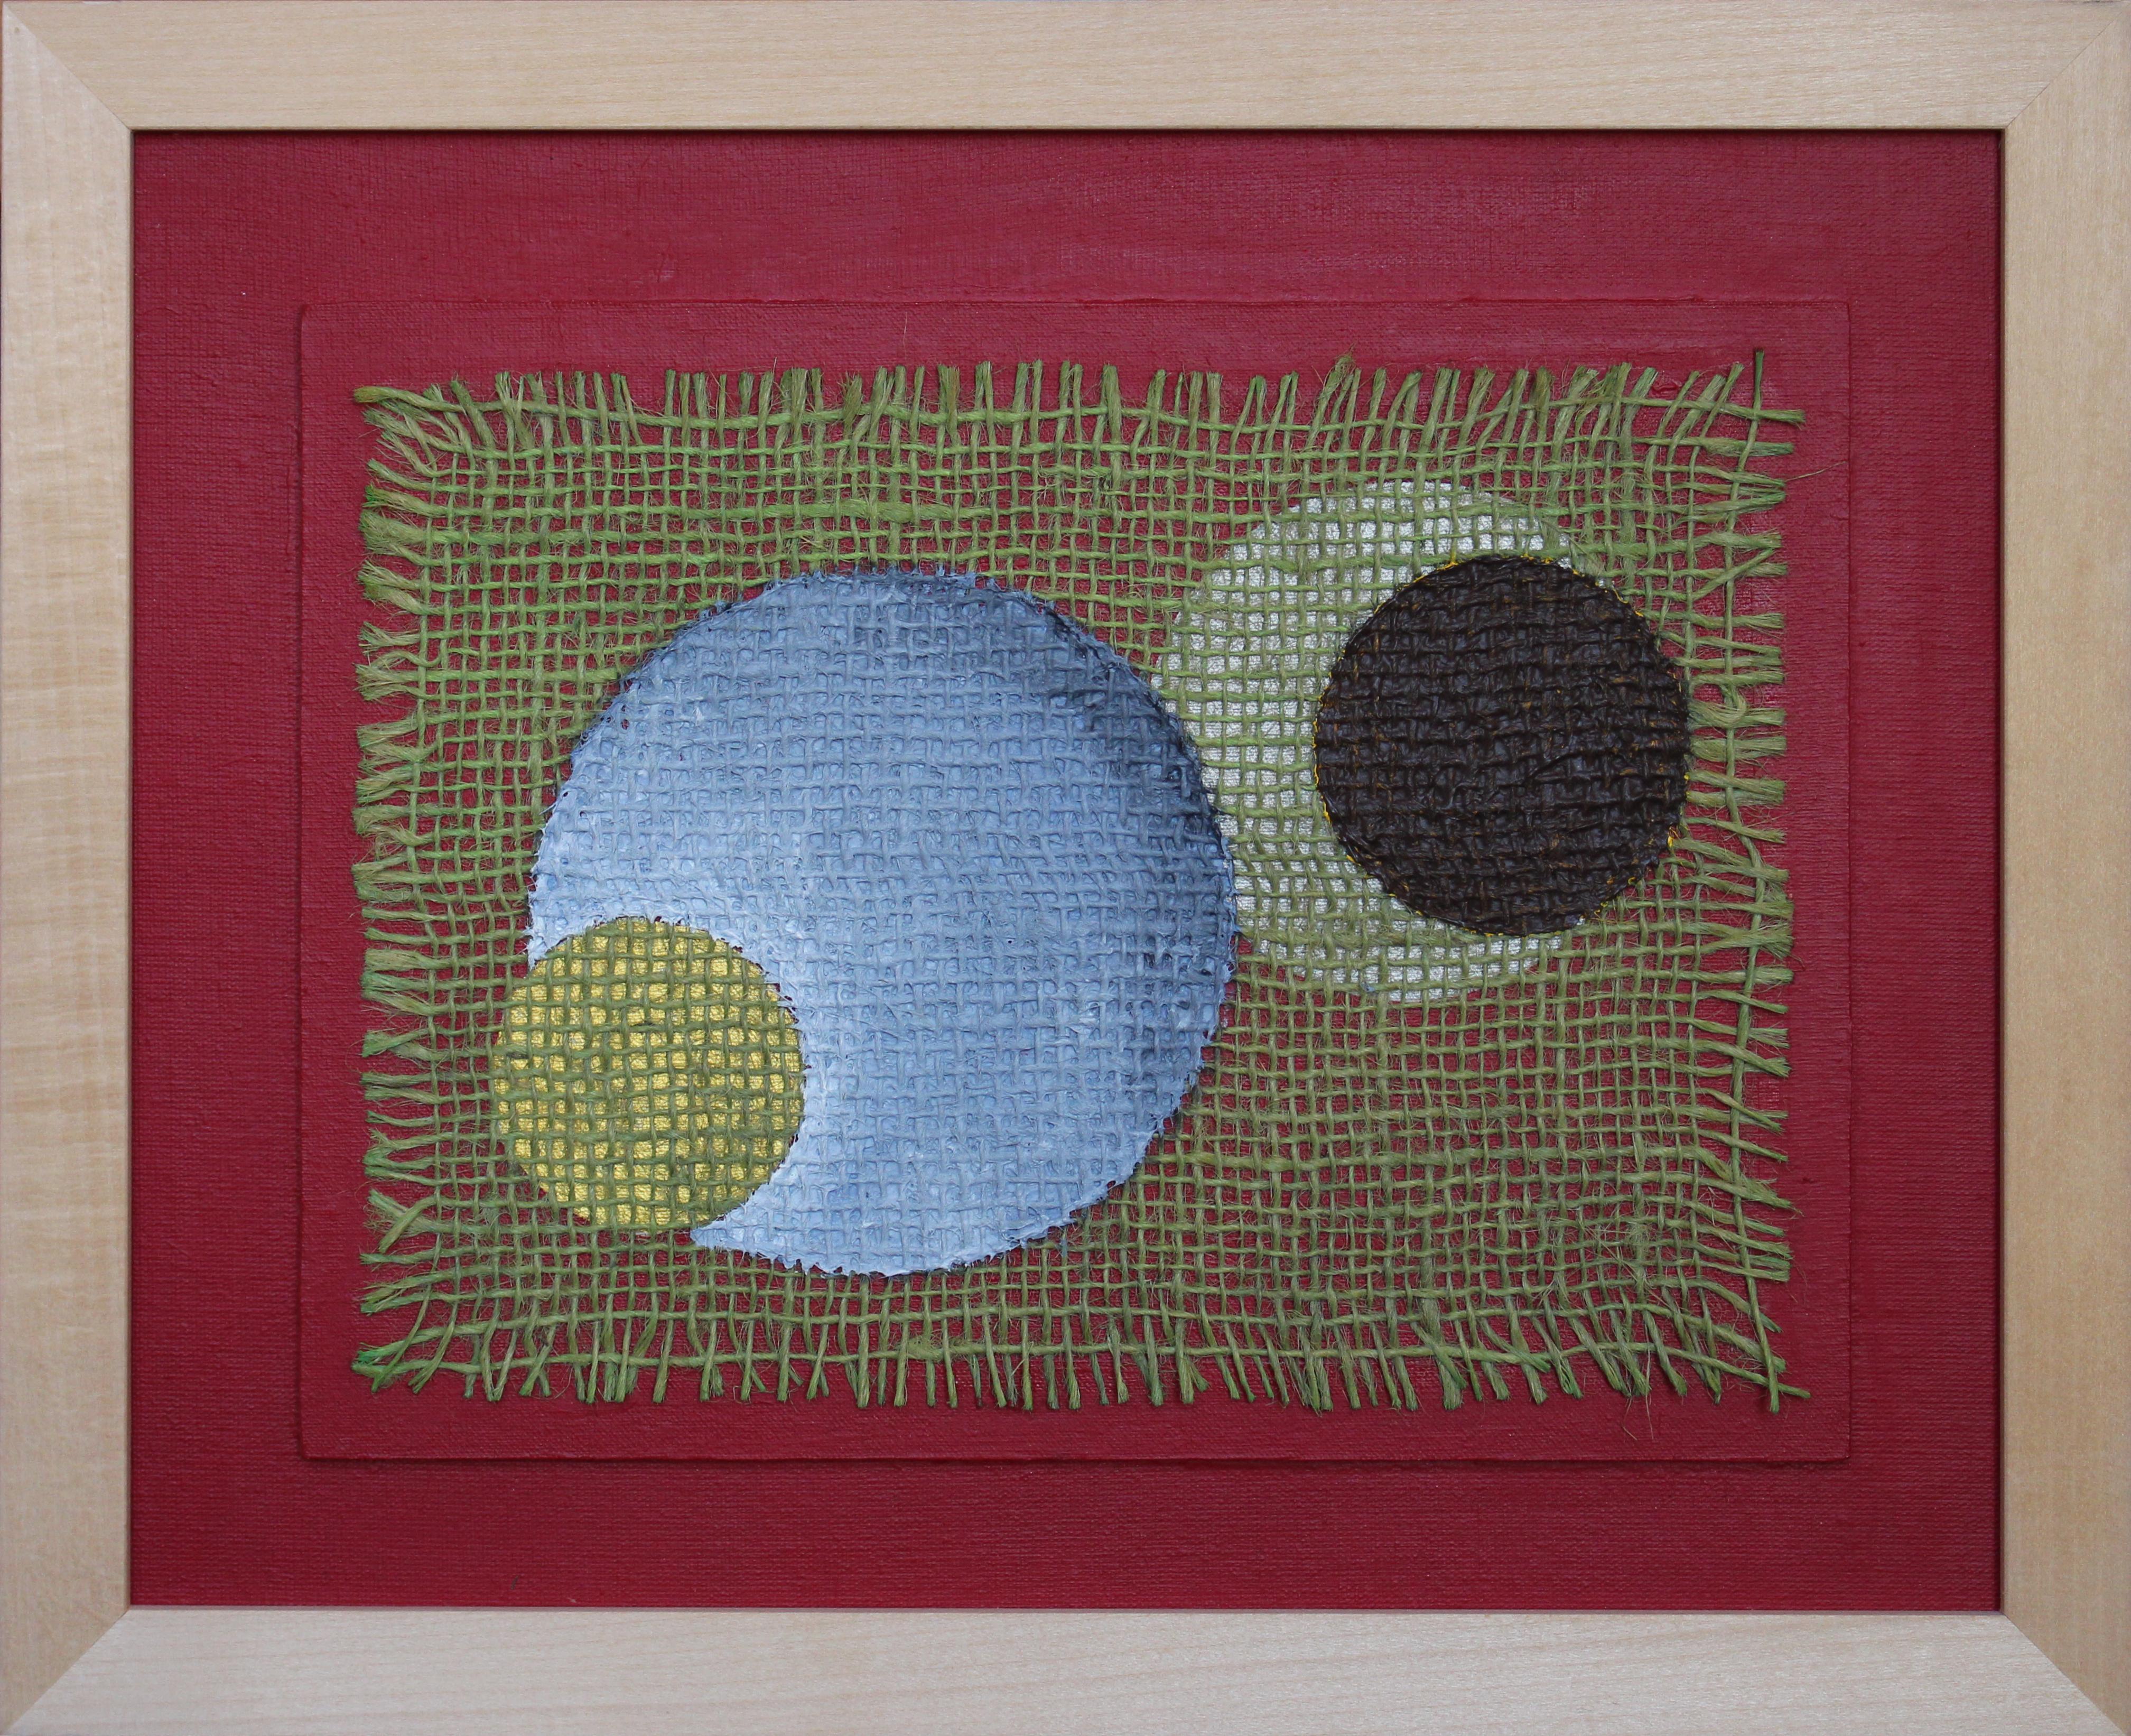 Acrylic paint and jute on board, 2015. Signed, titled and dated verso. Framed. It comes directly from the studio of the artist.
Height: 10.63 in ( 27 cm ), Width: 12.99 in ( 33 cm ), Depth: 1.18 in ( 3 cm )